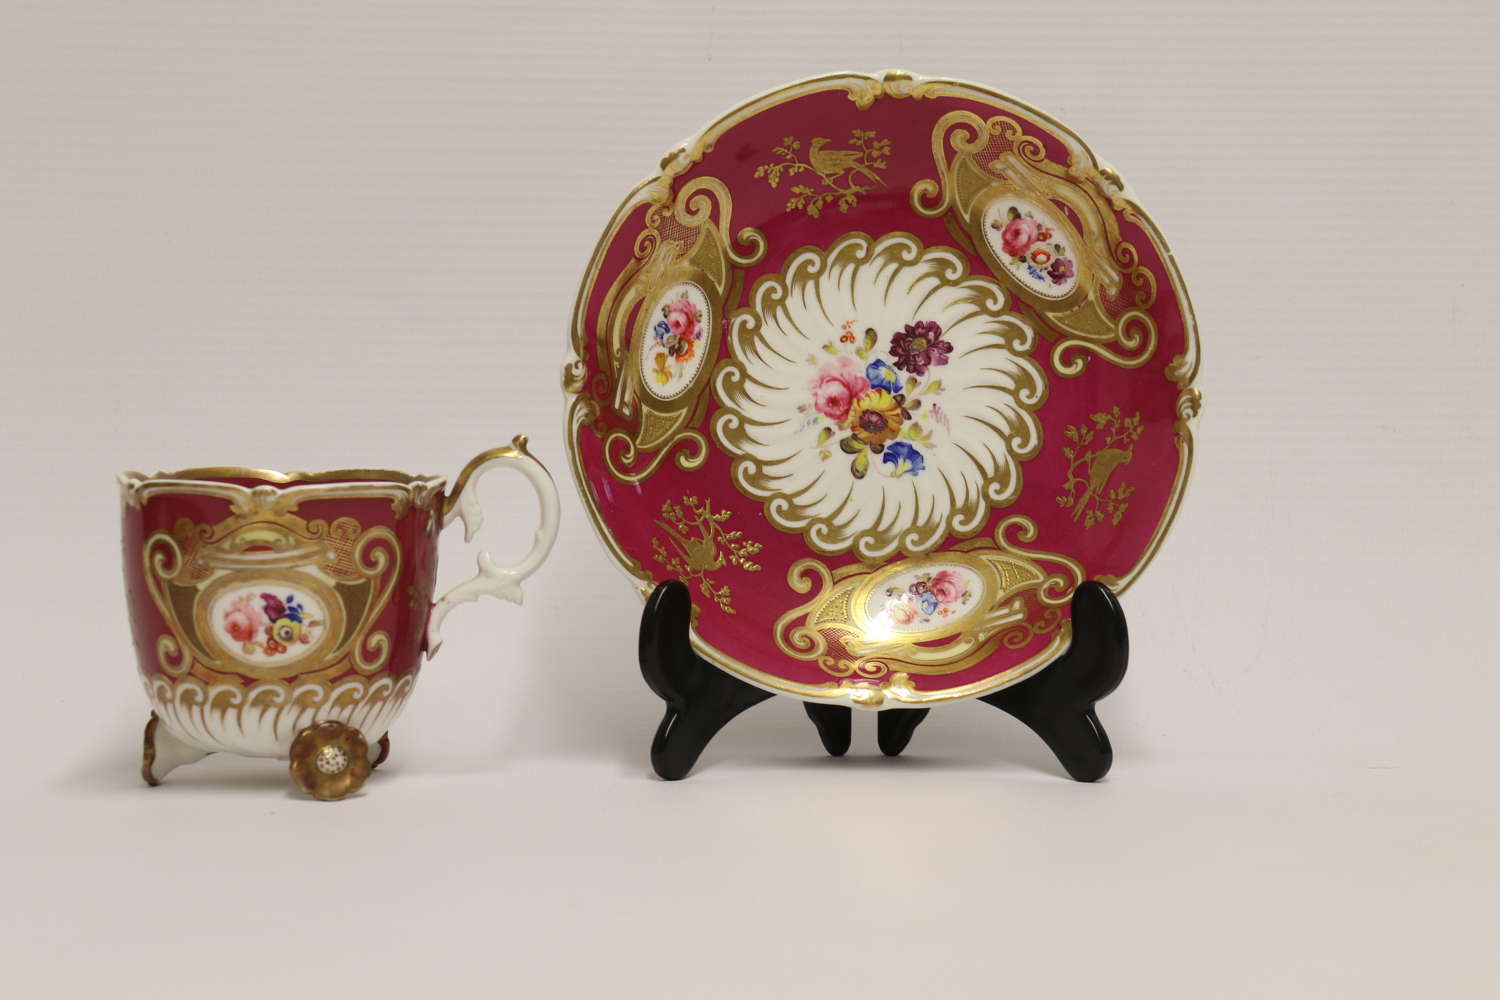 19th century cabinet cup and saucer by H and R Daniel Factory, C 1835